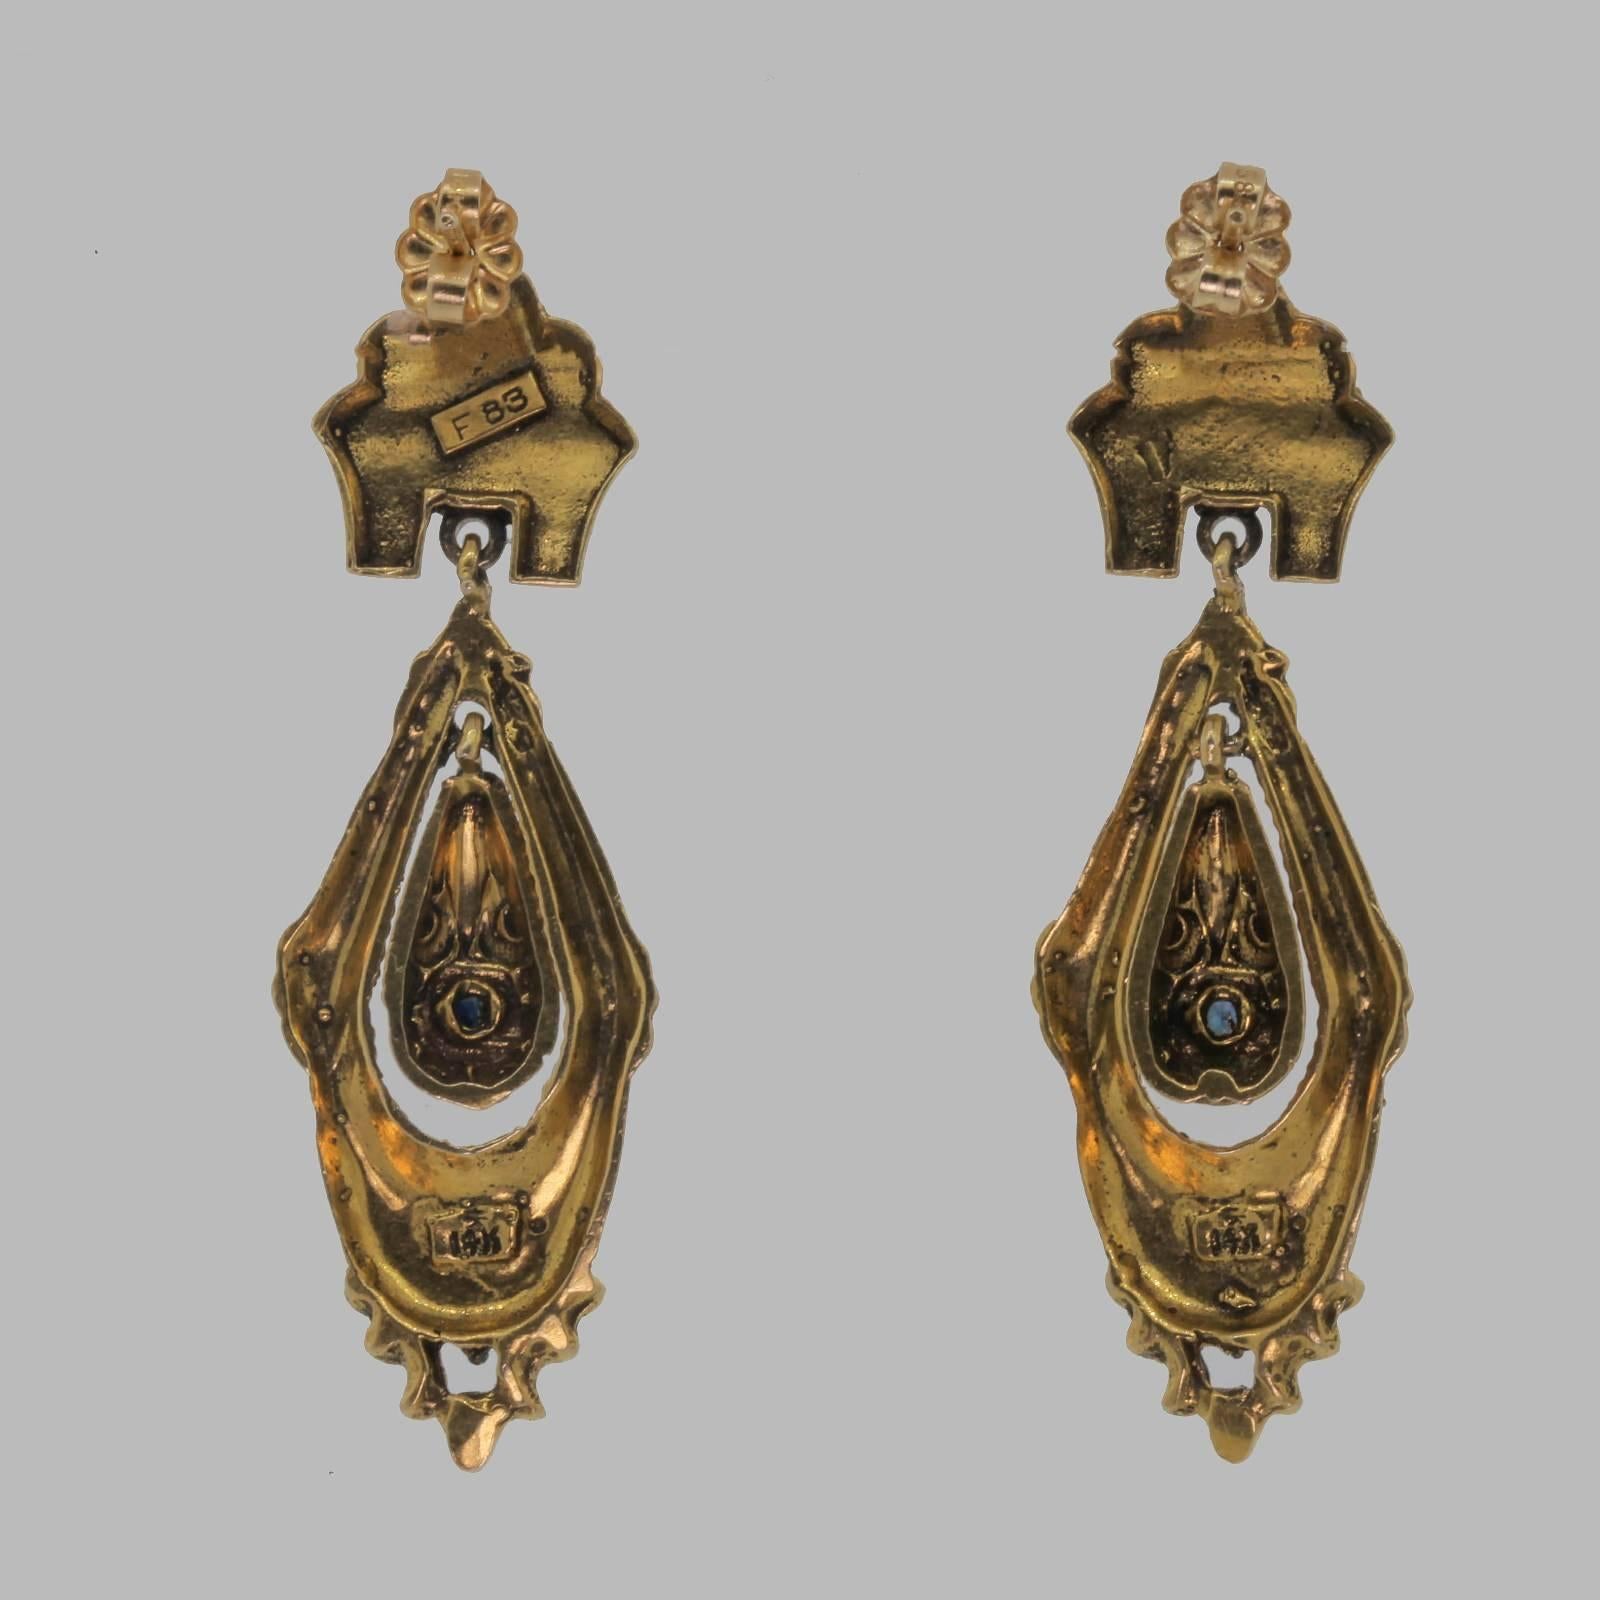 Regency revival vintage drop 14KT yellow gold earrings.  The elongated drops are accented in the center with a blue Sapphire and Seed Pearls at the bottom of the dangles.  The 2 inches long earrings are enhanced with engraving designs and stamped